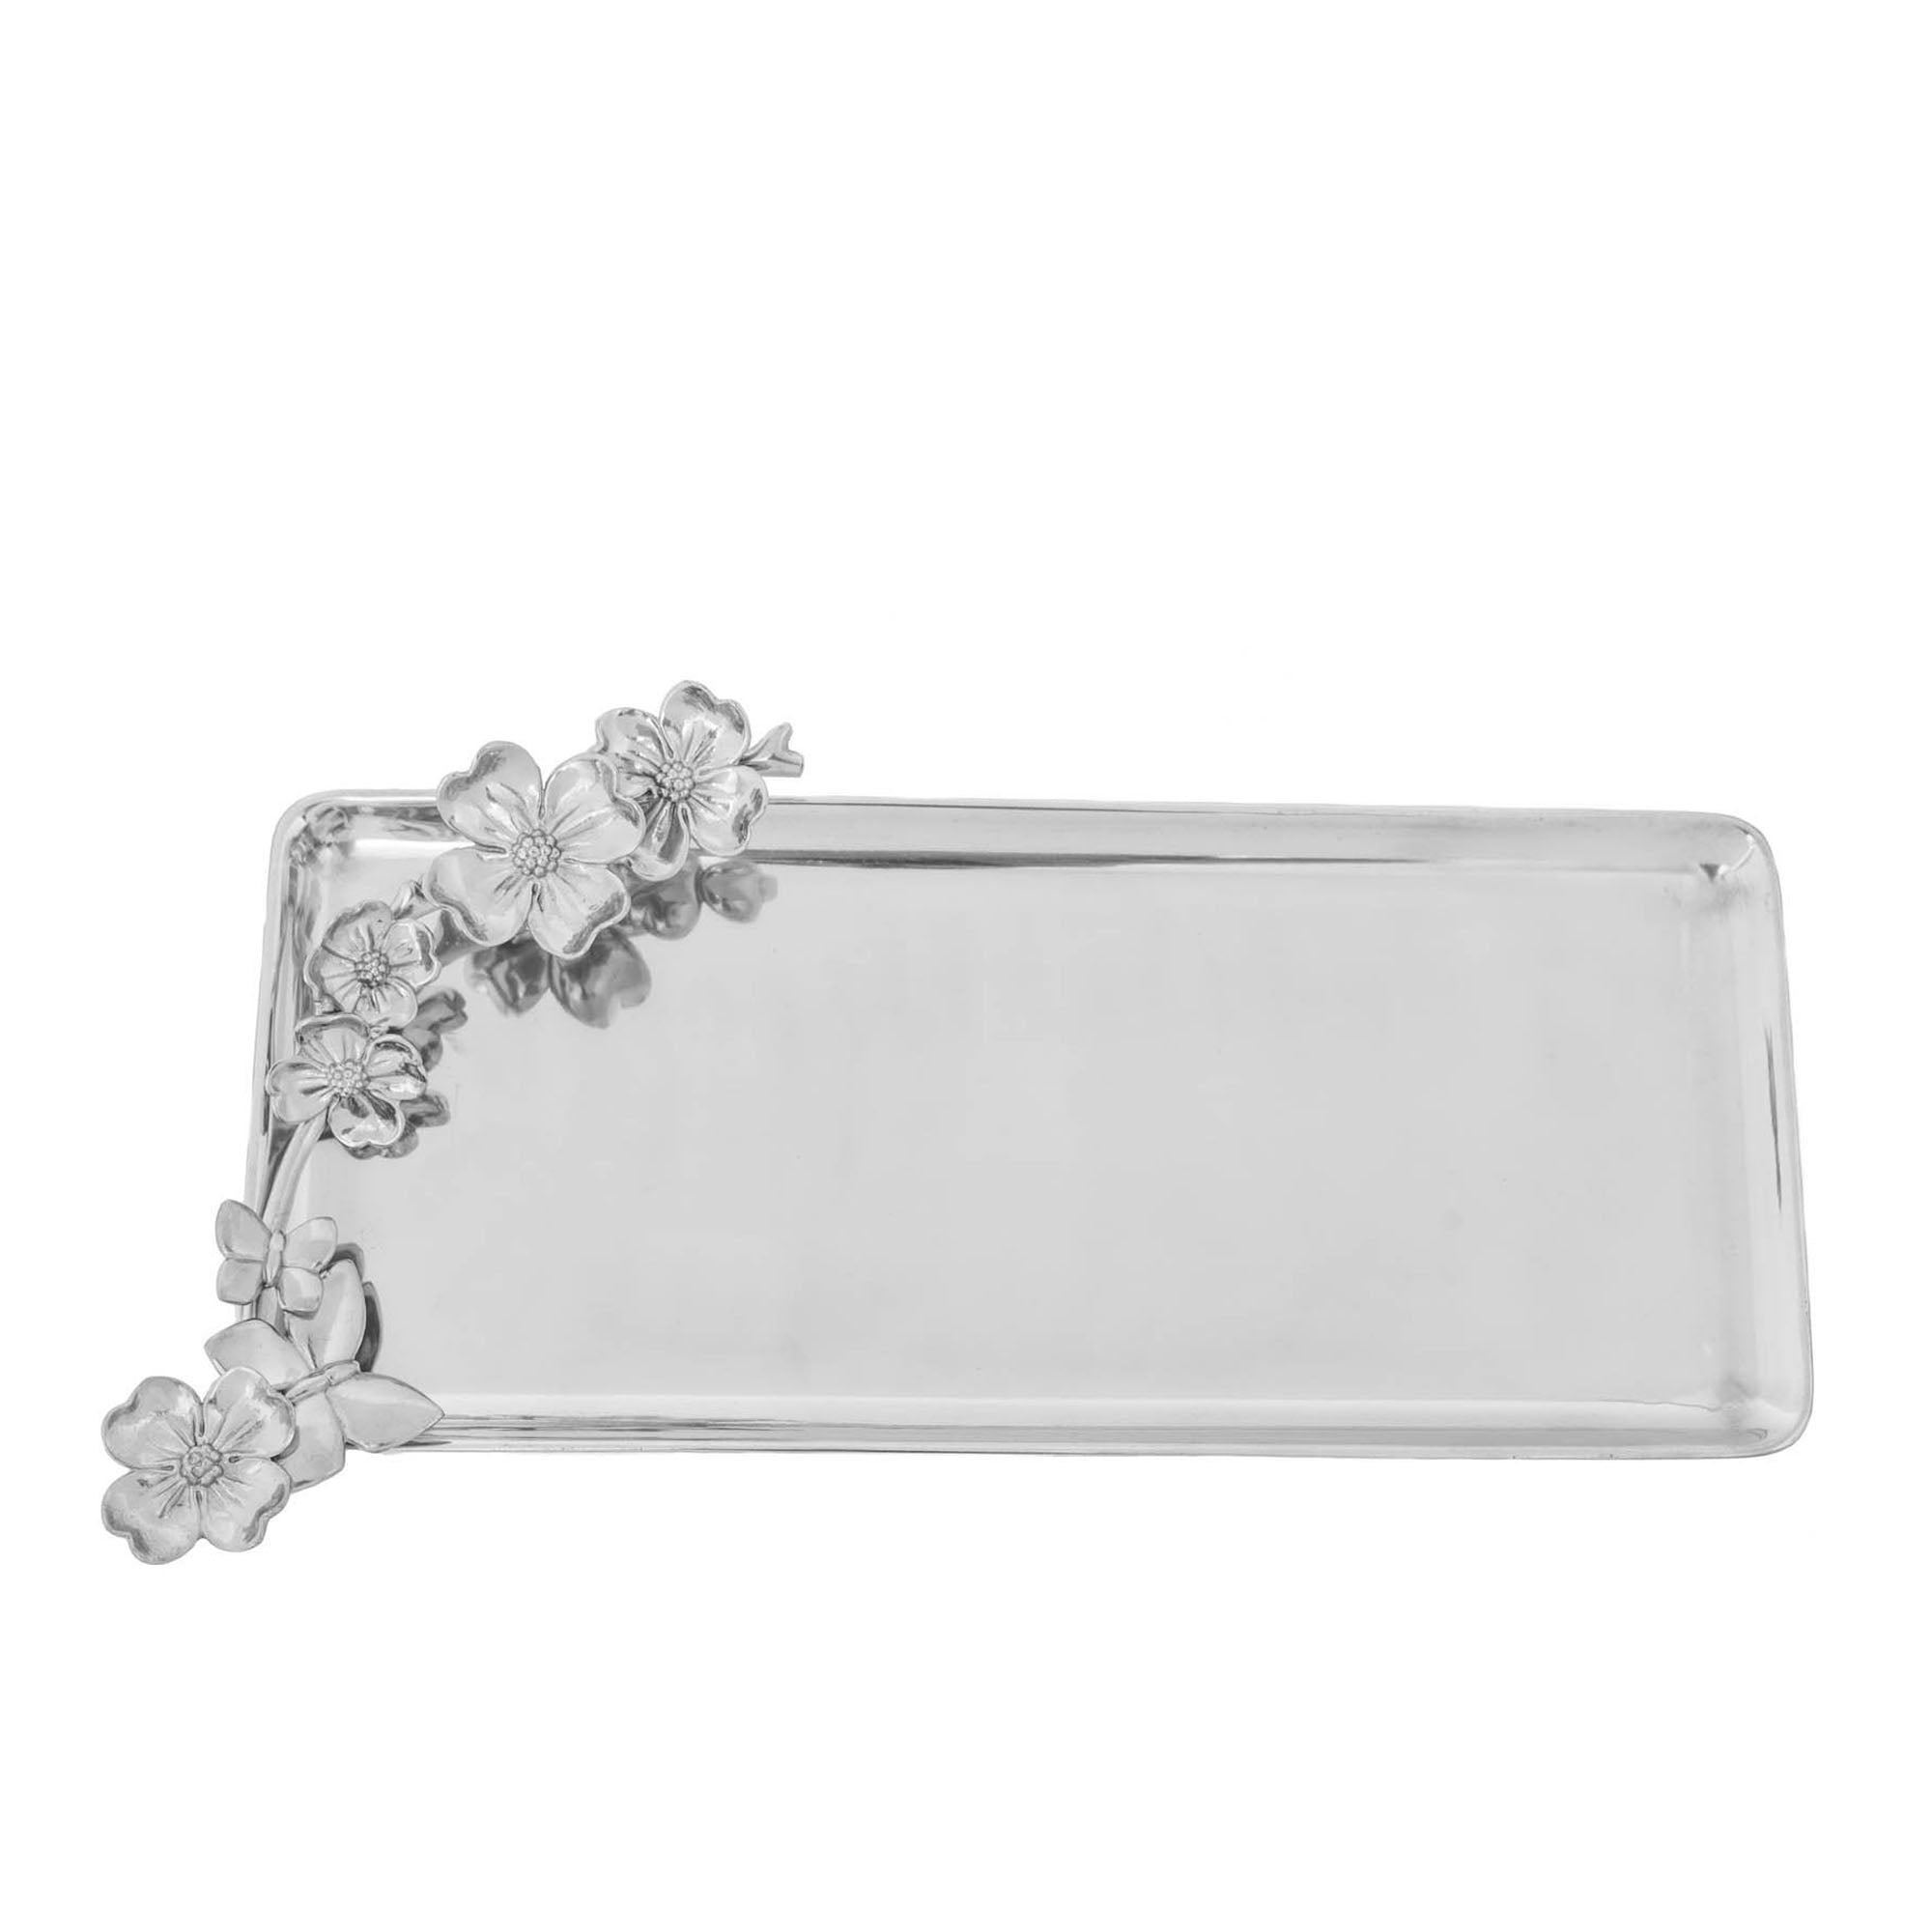 Arthur Court Butterfly Oblong Dogwood Tray Product Image